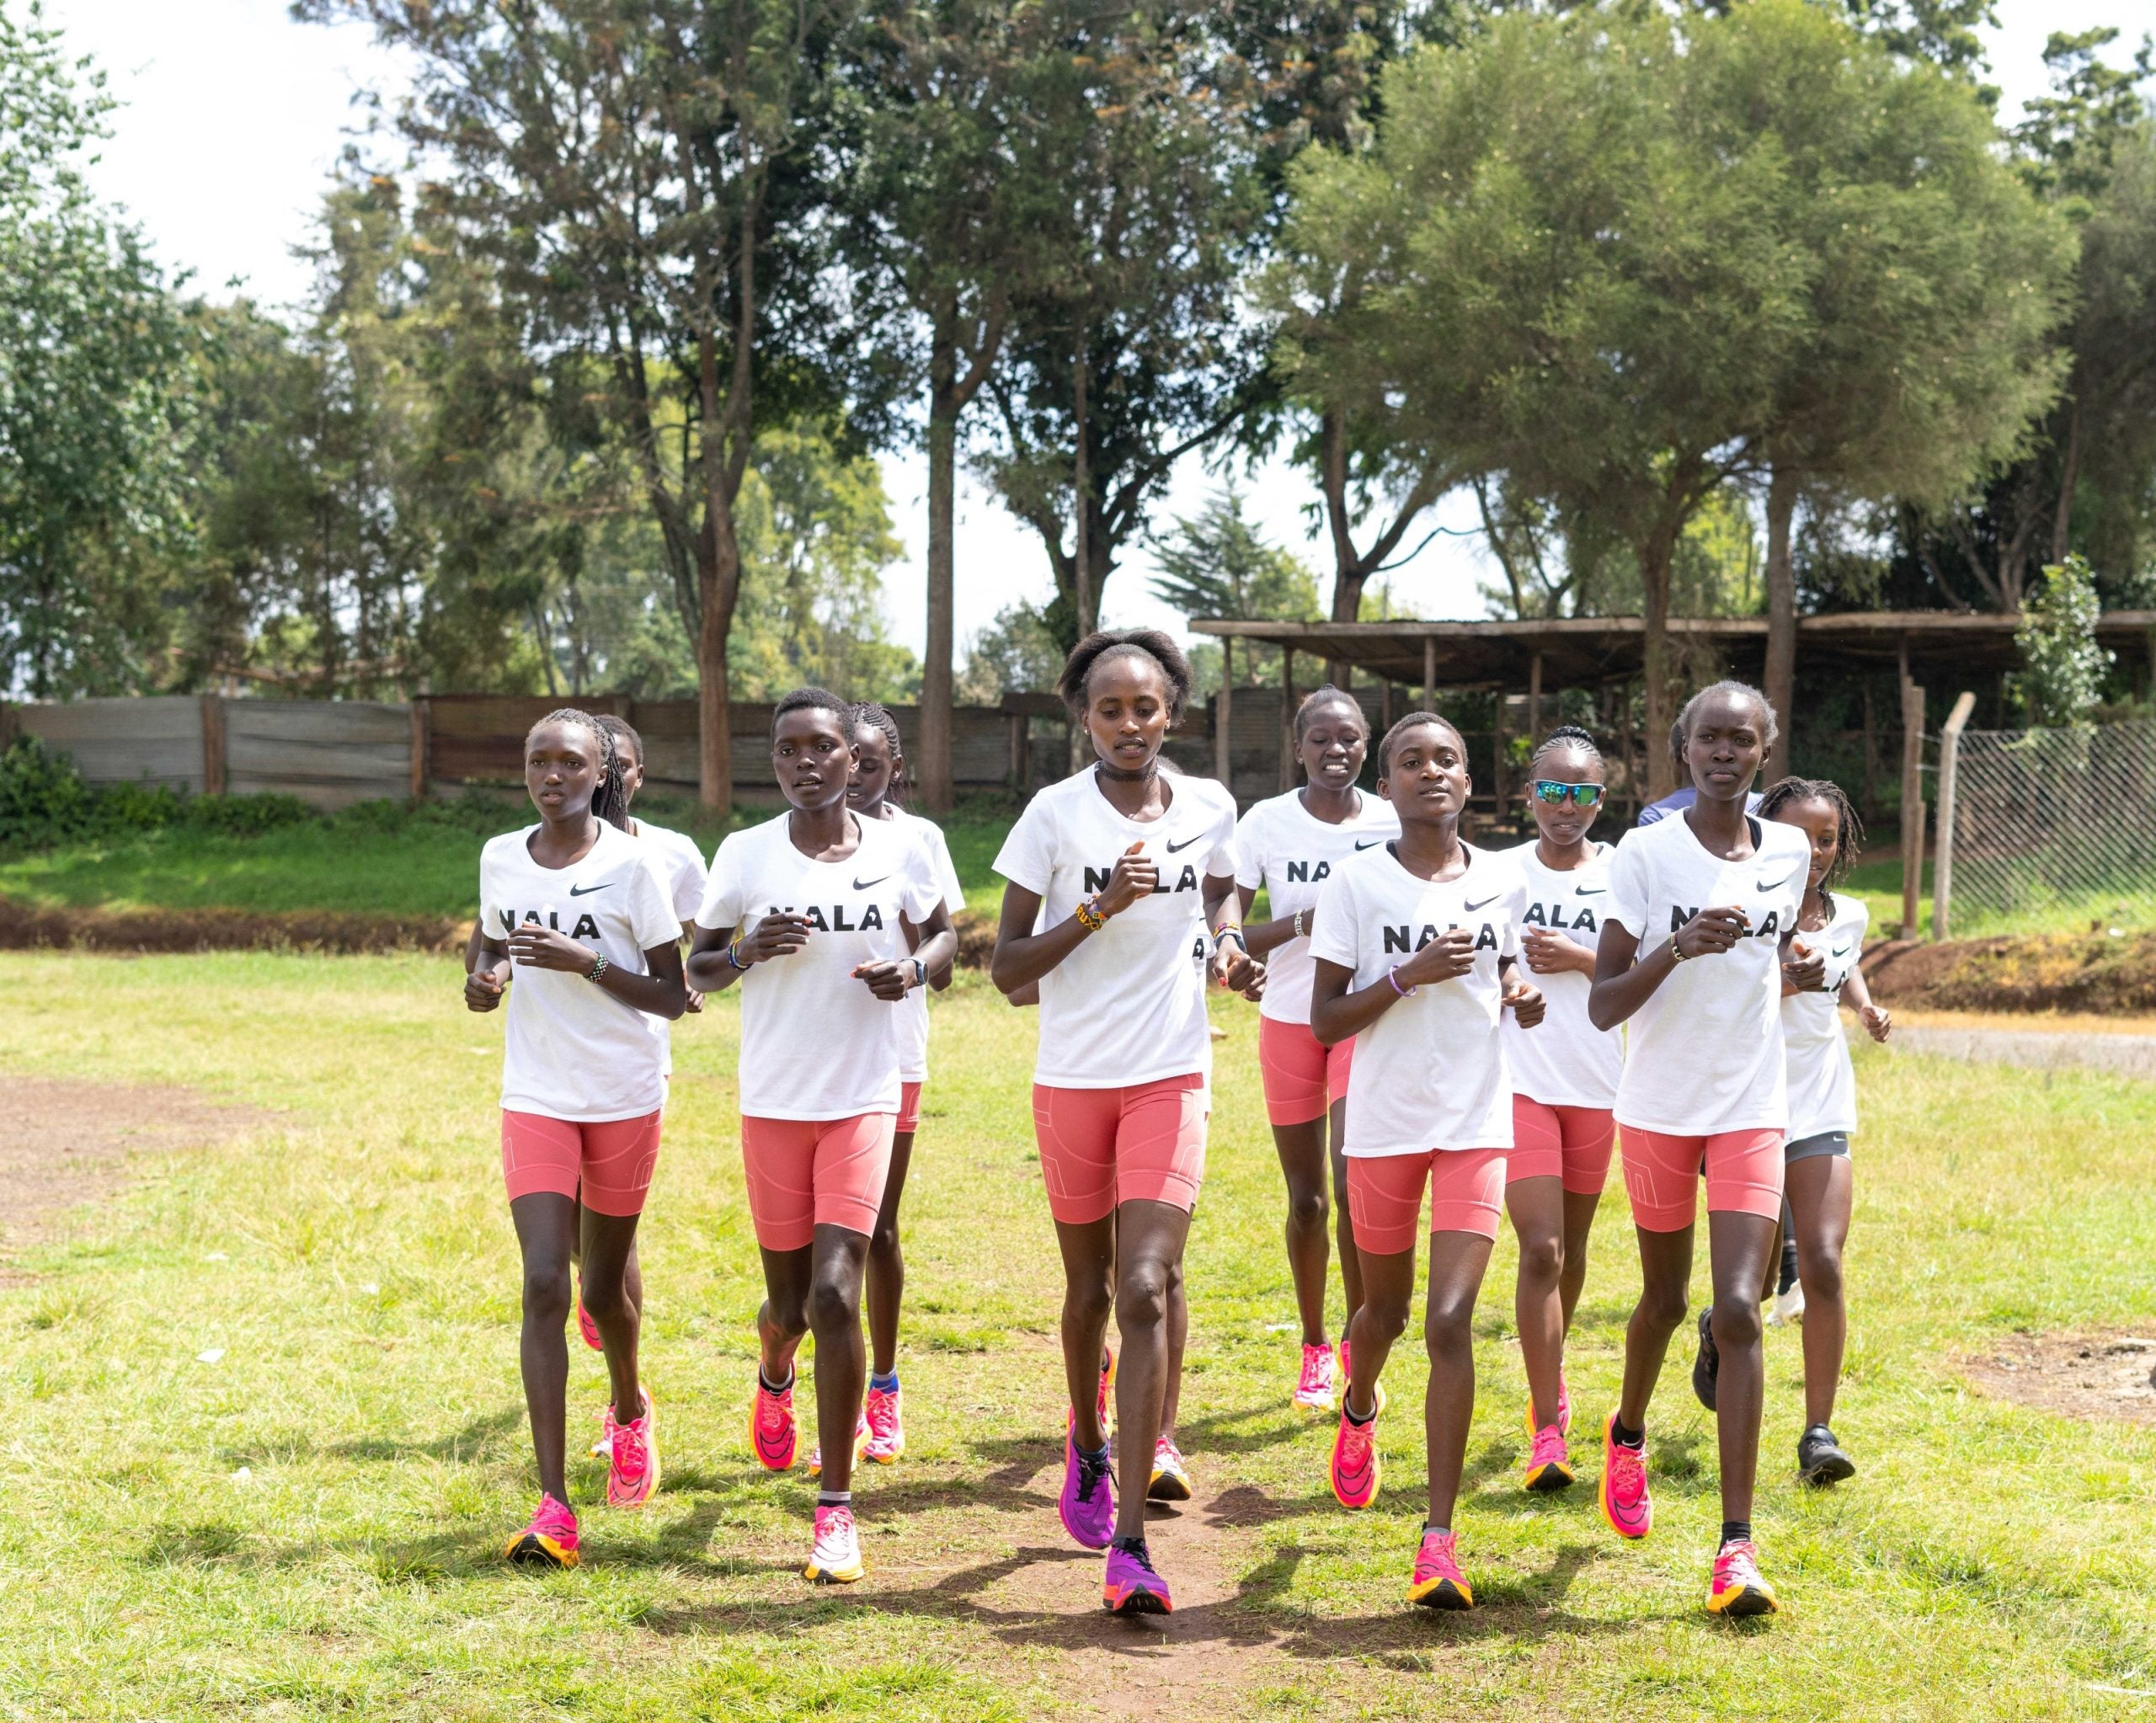 Mary Ngugi-Cooper Is In A Race To Secure A Better Future For Young Kenyan Women Runners